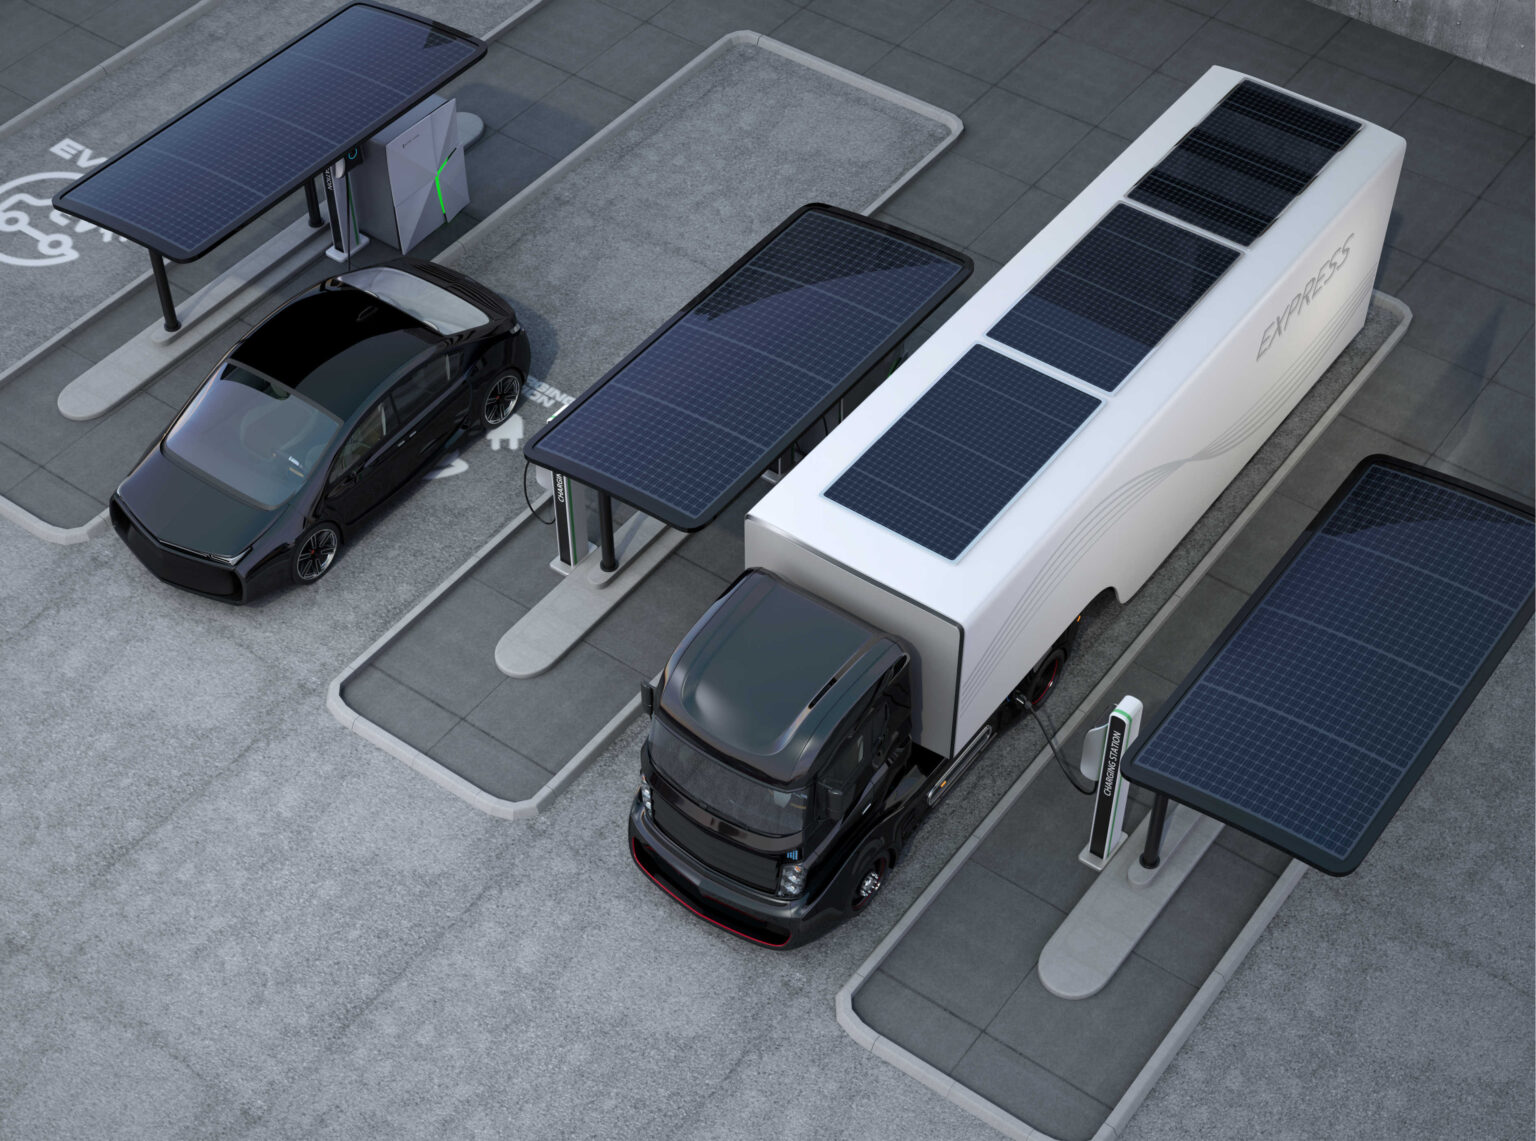 Solar power in trucking's forecast as fleets find energy, cost savings